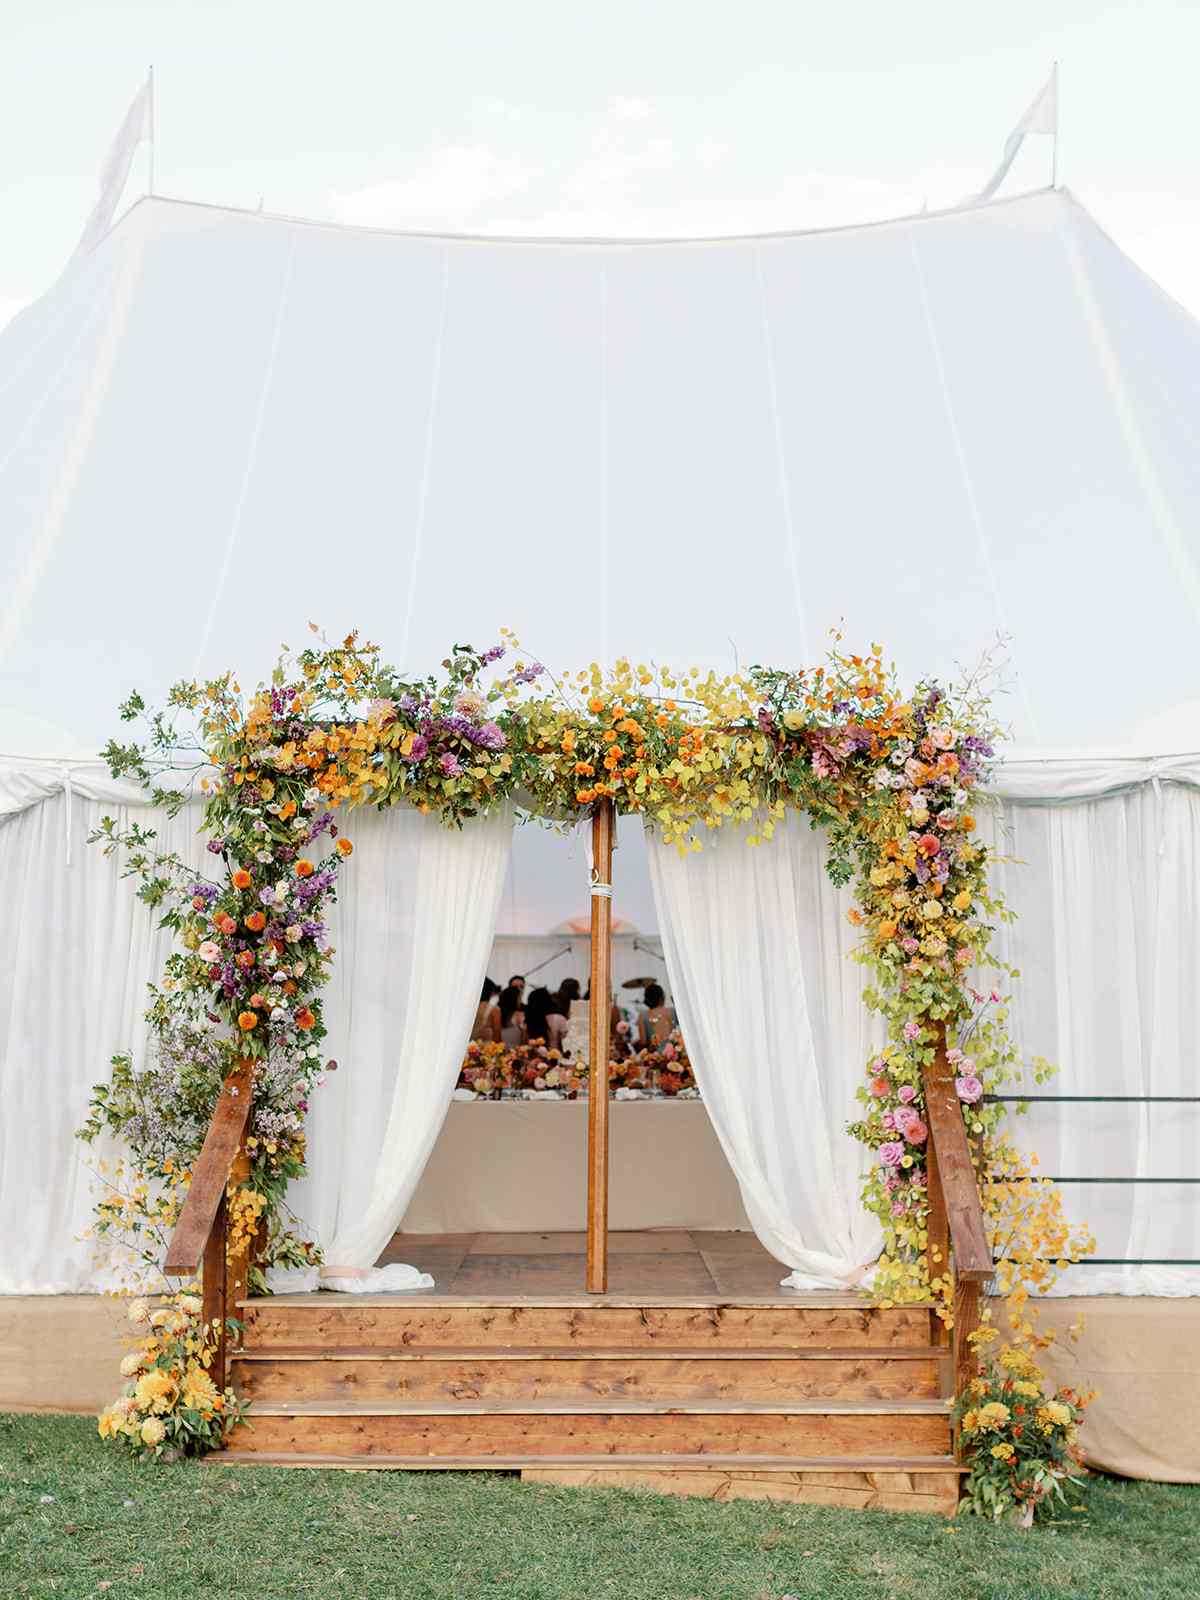 large outdoor reception tent with colorful flowers at the entrance